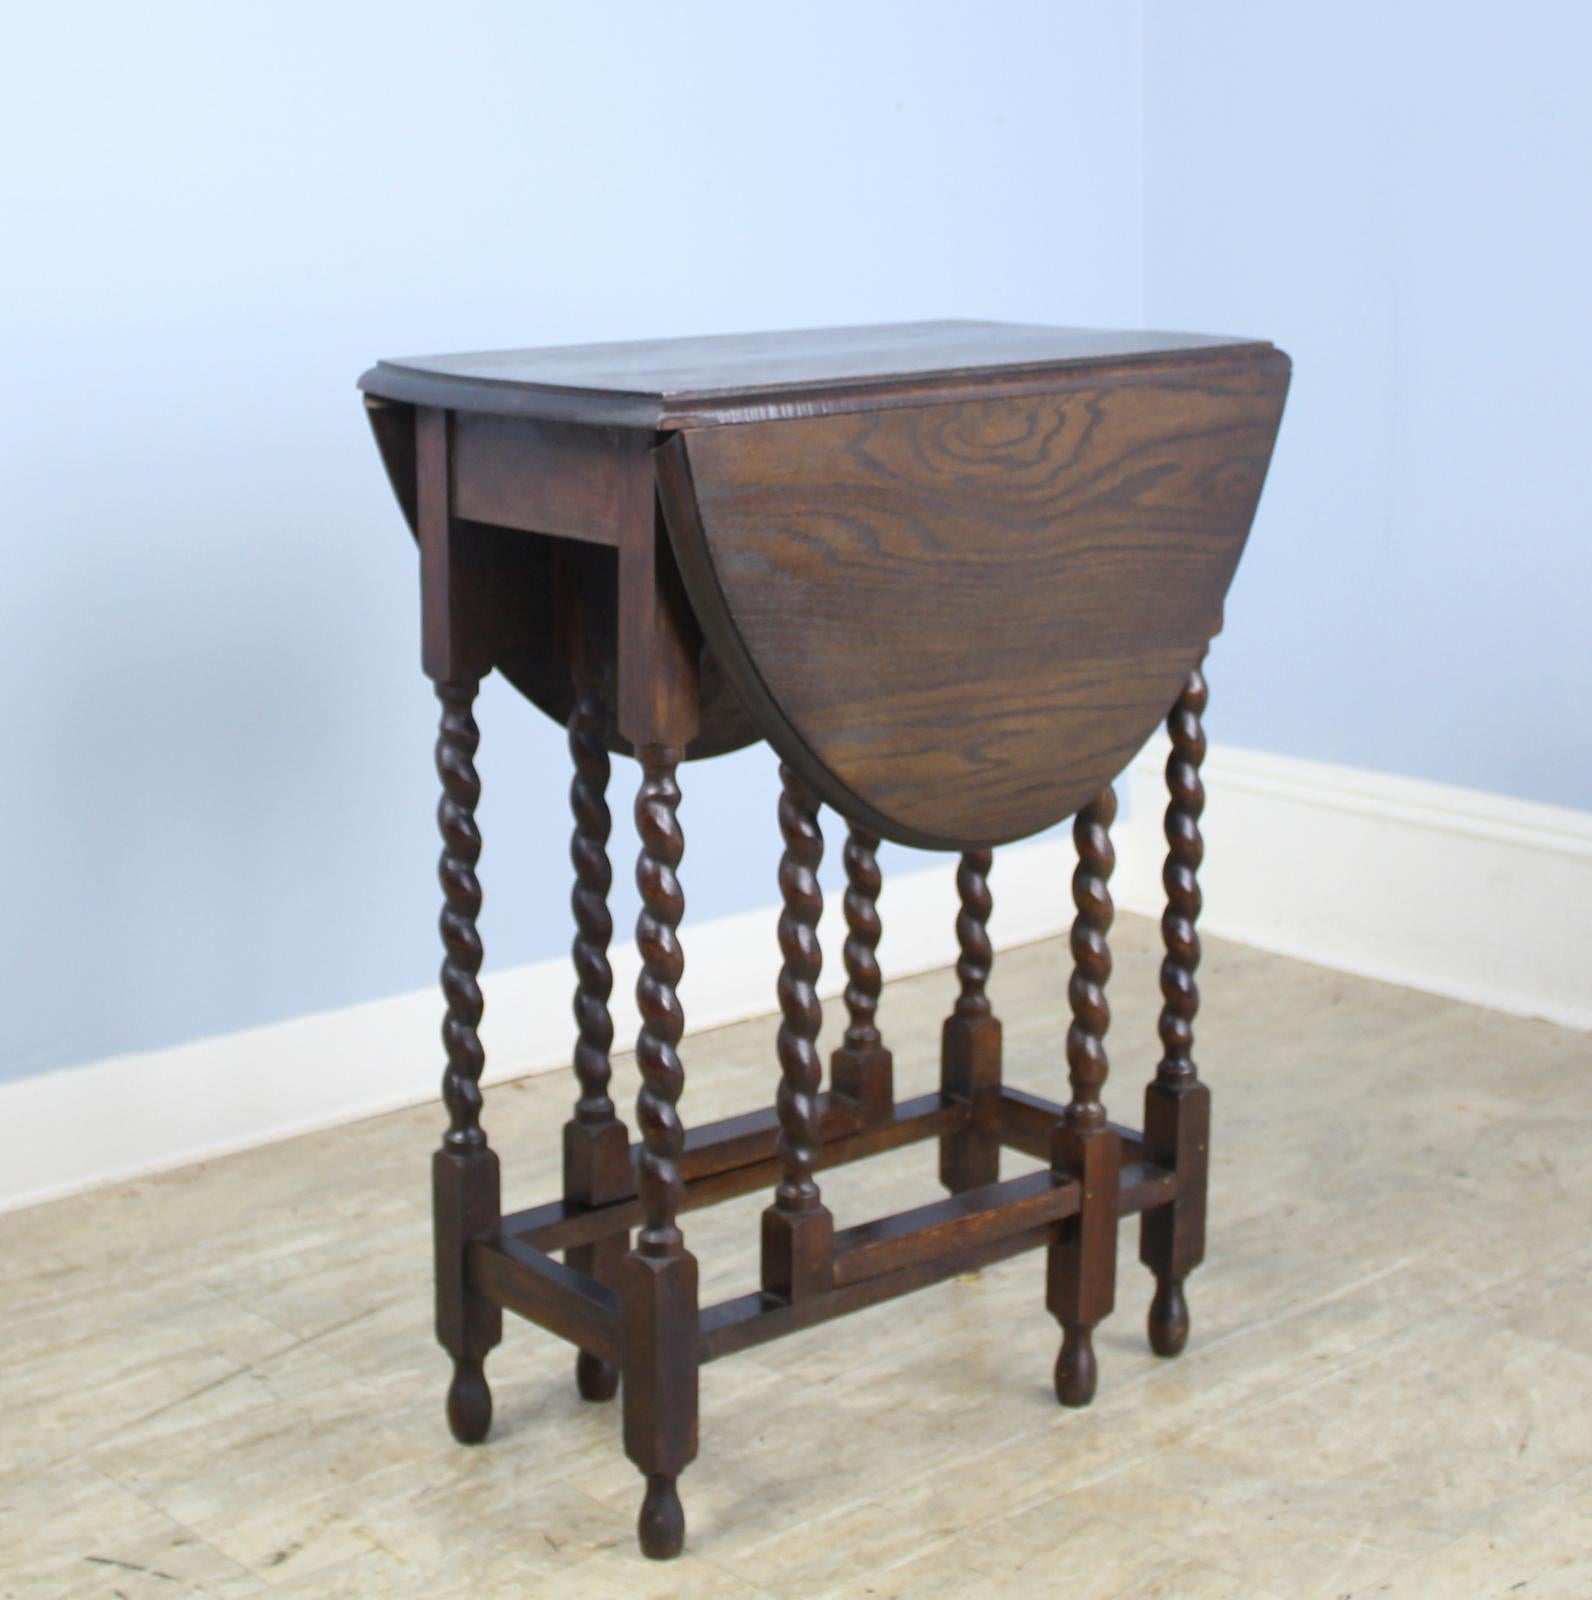 This is an excellent example of the classic. It is a smaller size, suitable as a small breakfast table, fine for a tea table. Good dark color and nice patina; turnings are eye catching. It is appropriate as a side, lamp or end table. Additionally,